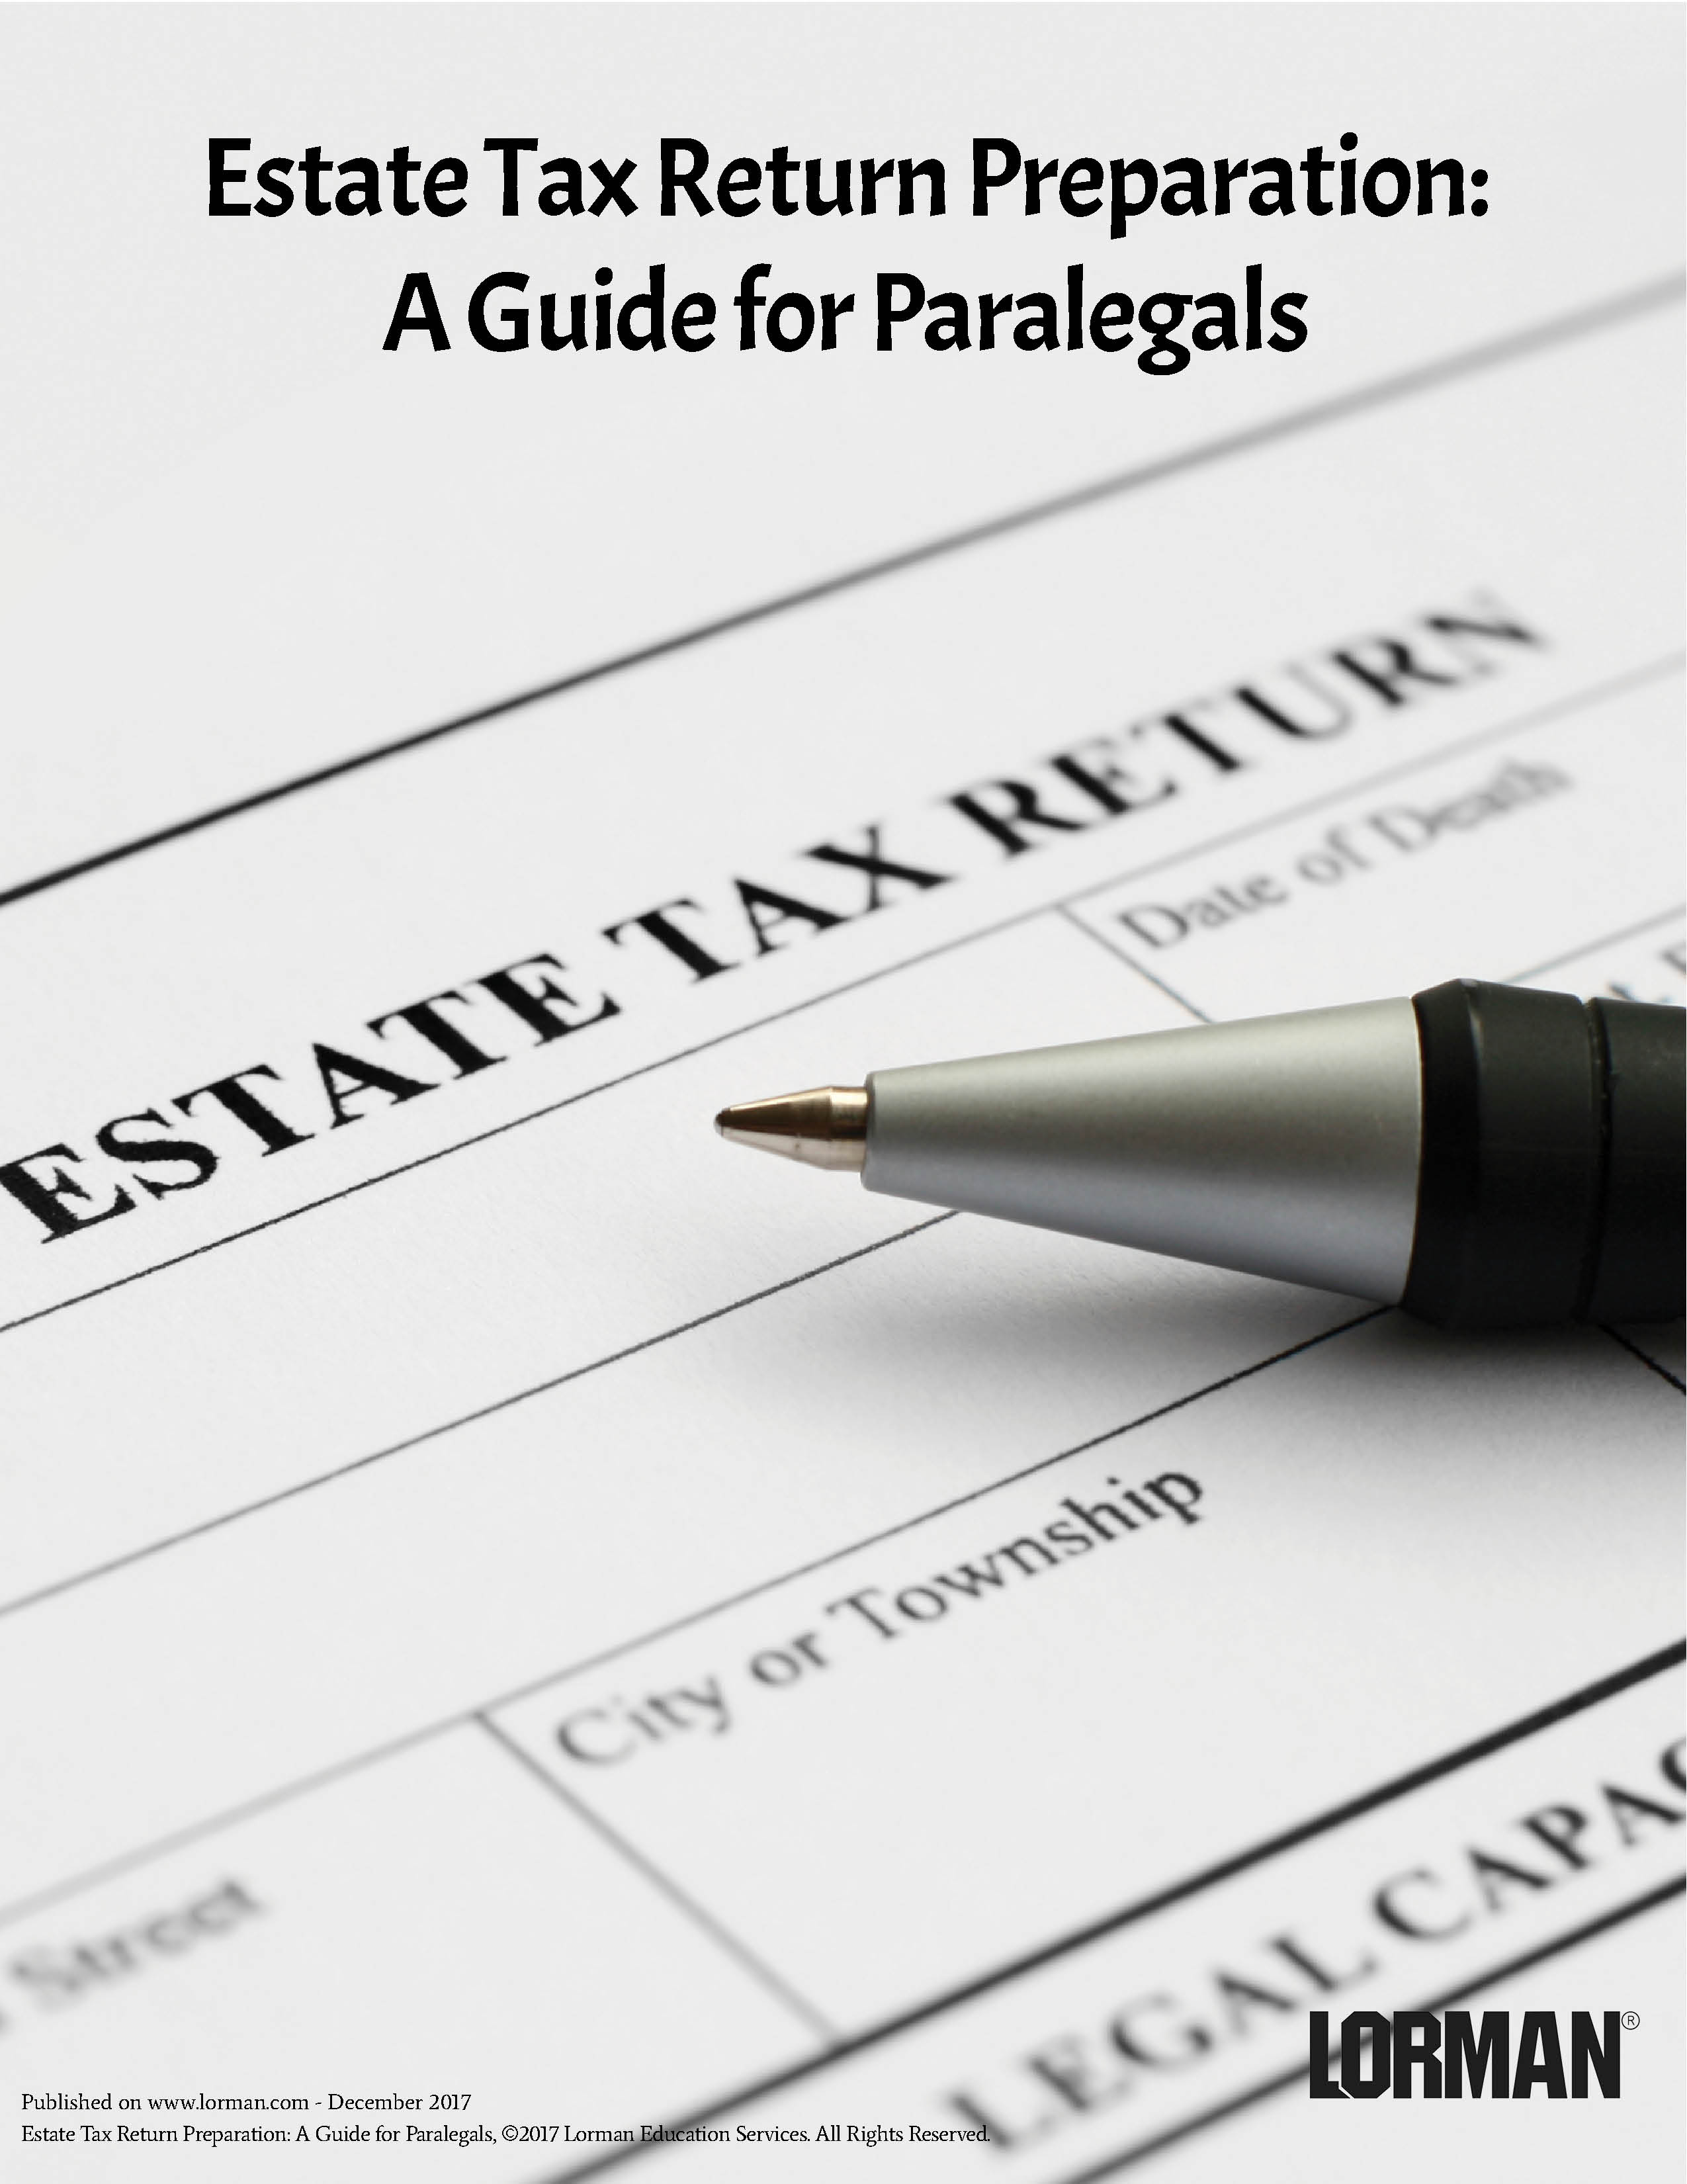 Estate Tax Return Preparation: A Guide for Paralegals